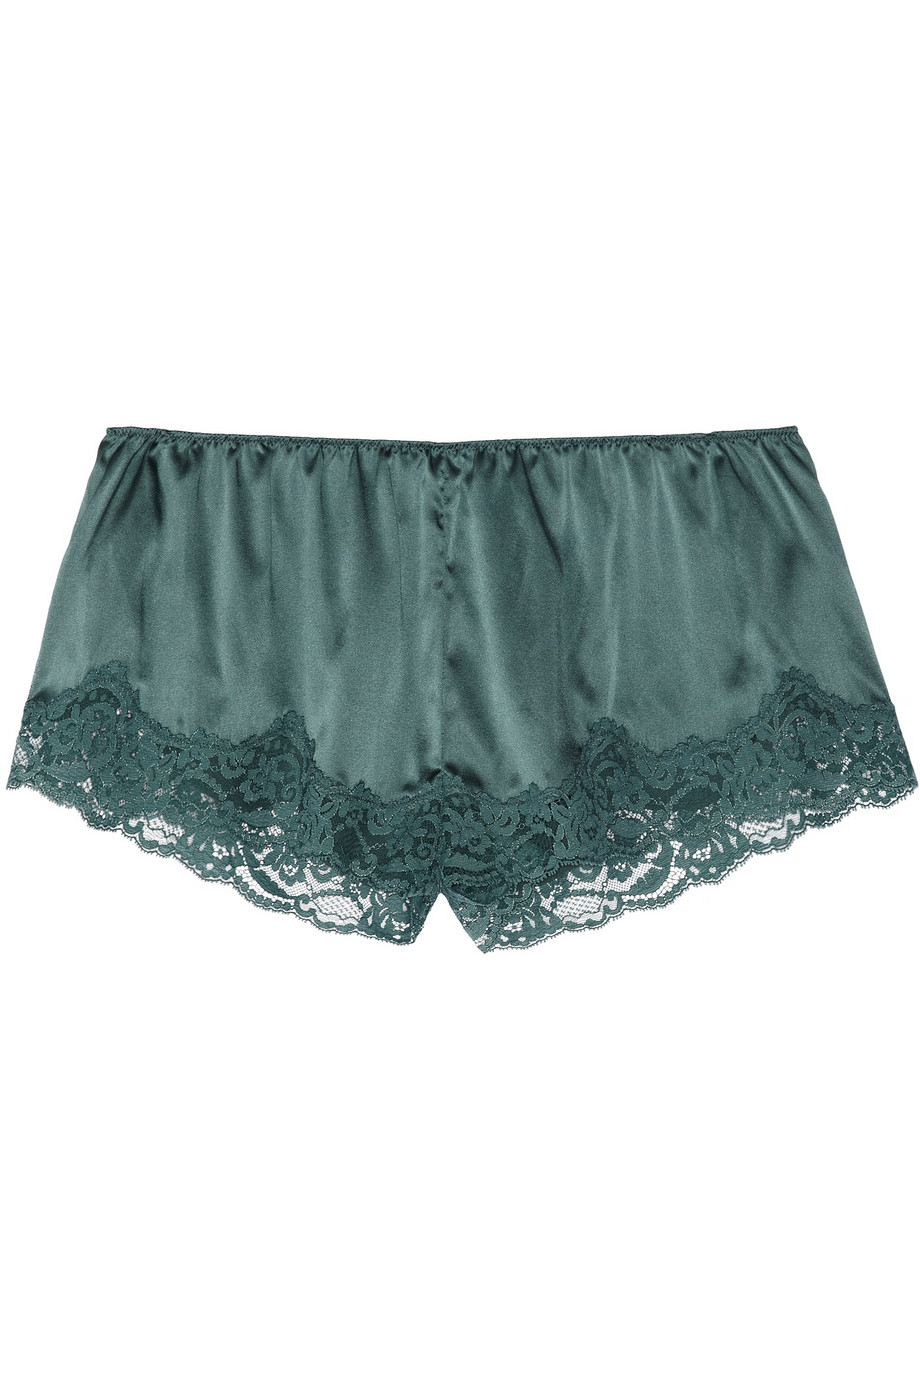 Lyst - Stella mccartney Ruby Snoozing Stretch Silk and Lace Shorts in Green